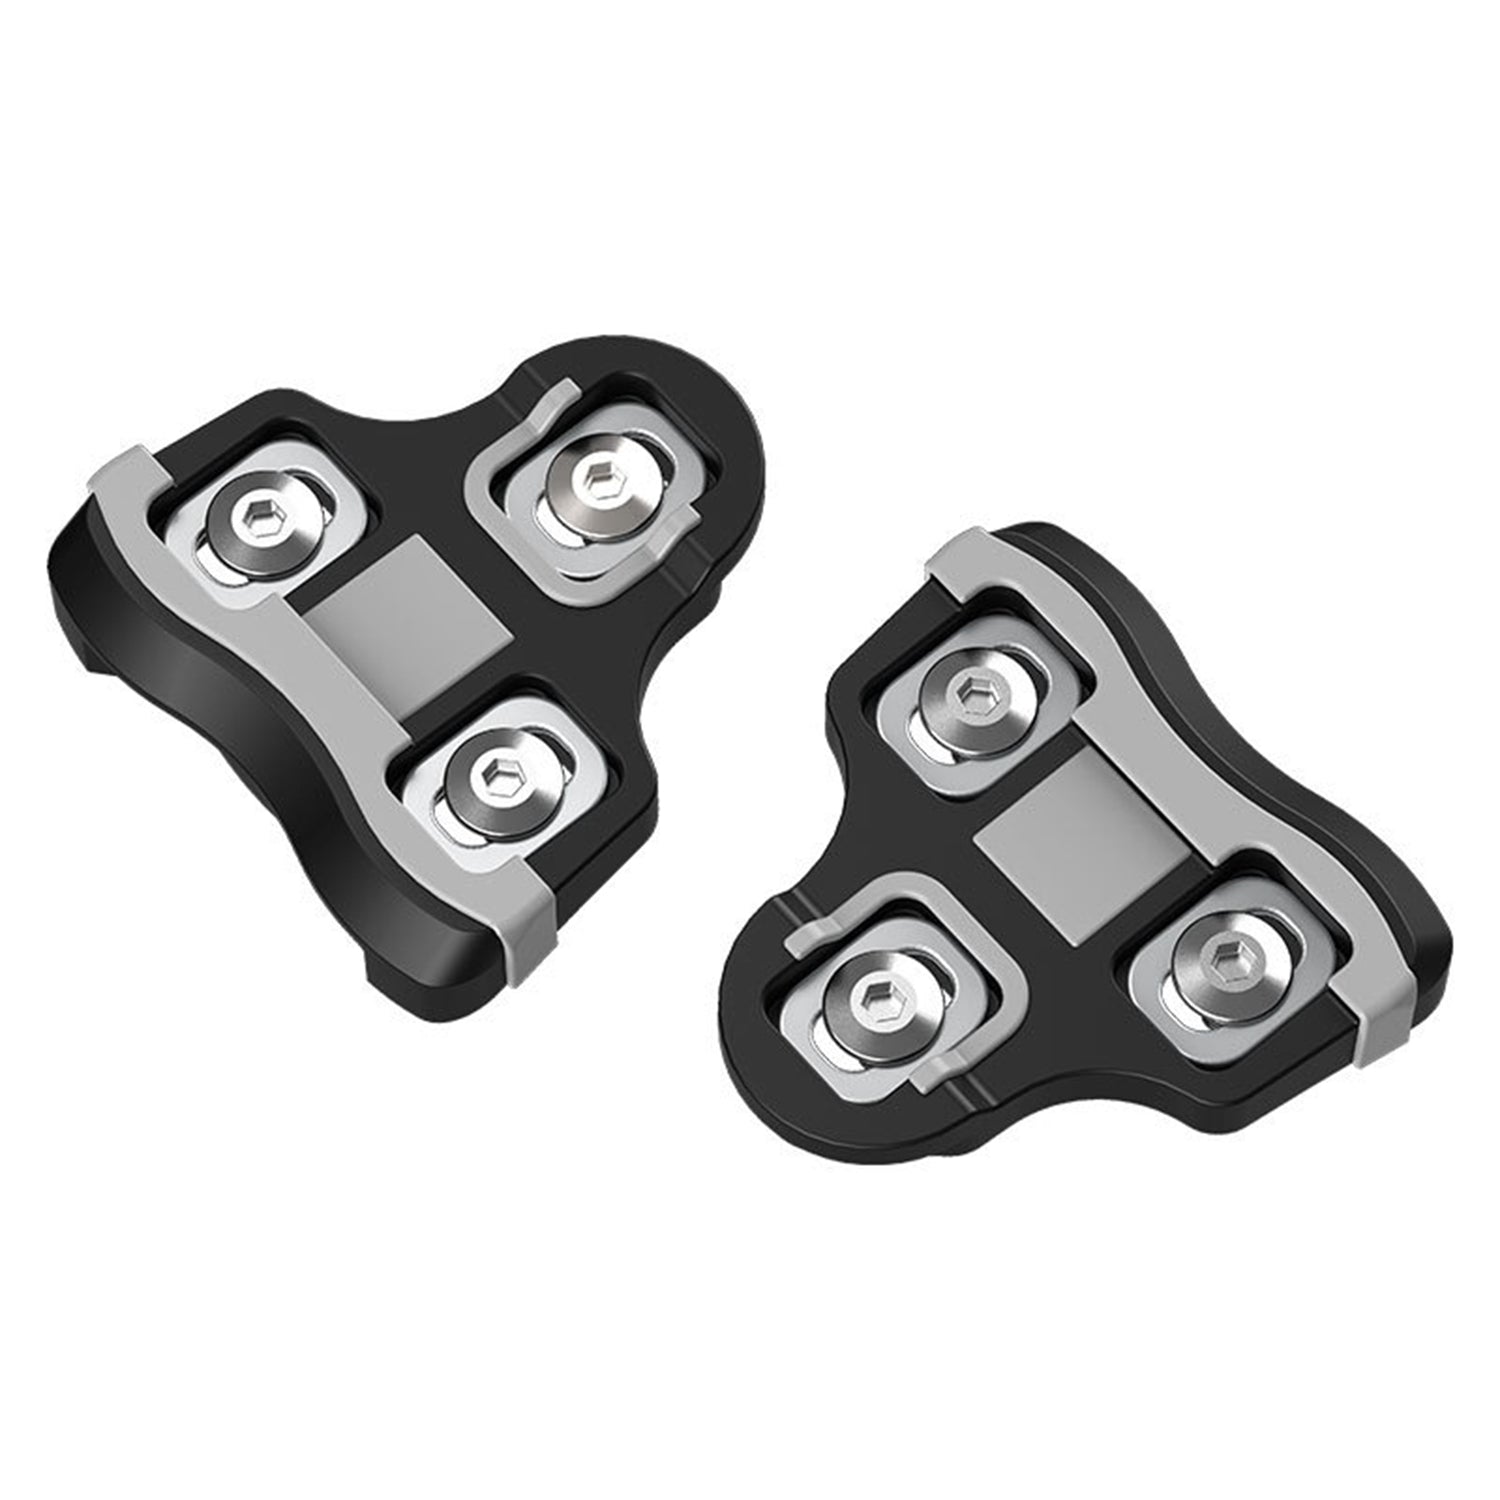 Favero Assioma Cleats-Bicycle Pedals-Favero-Black (0 degrees)-Chain Driven Cycles-Bike Shop-Ireland